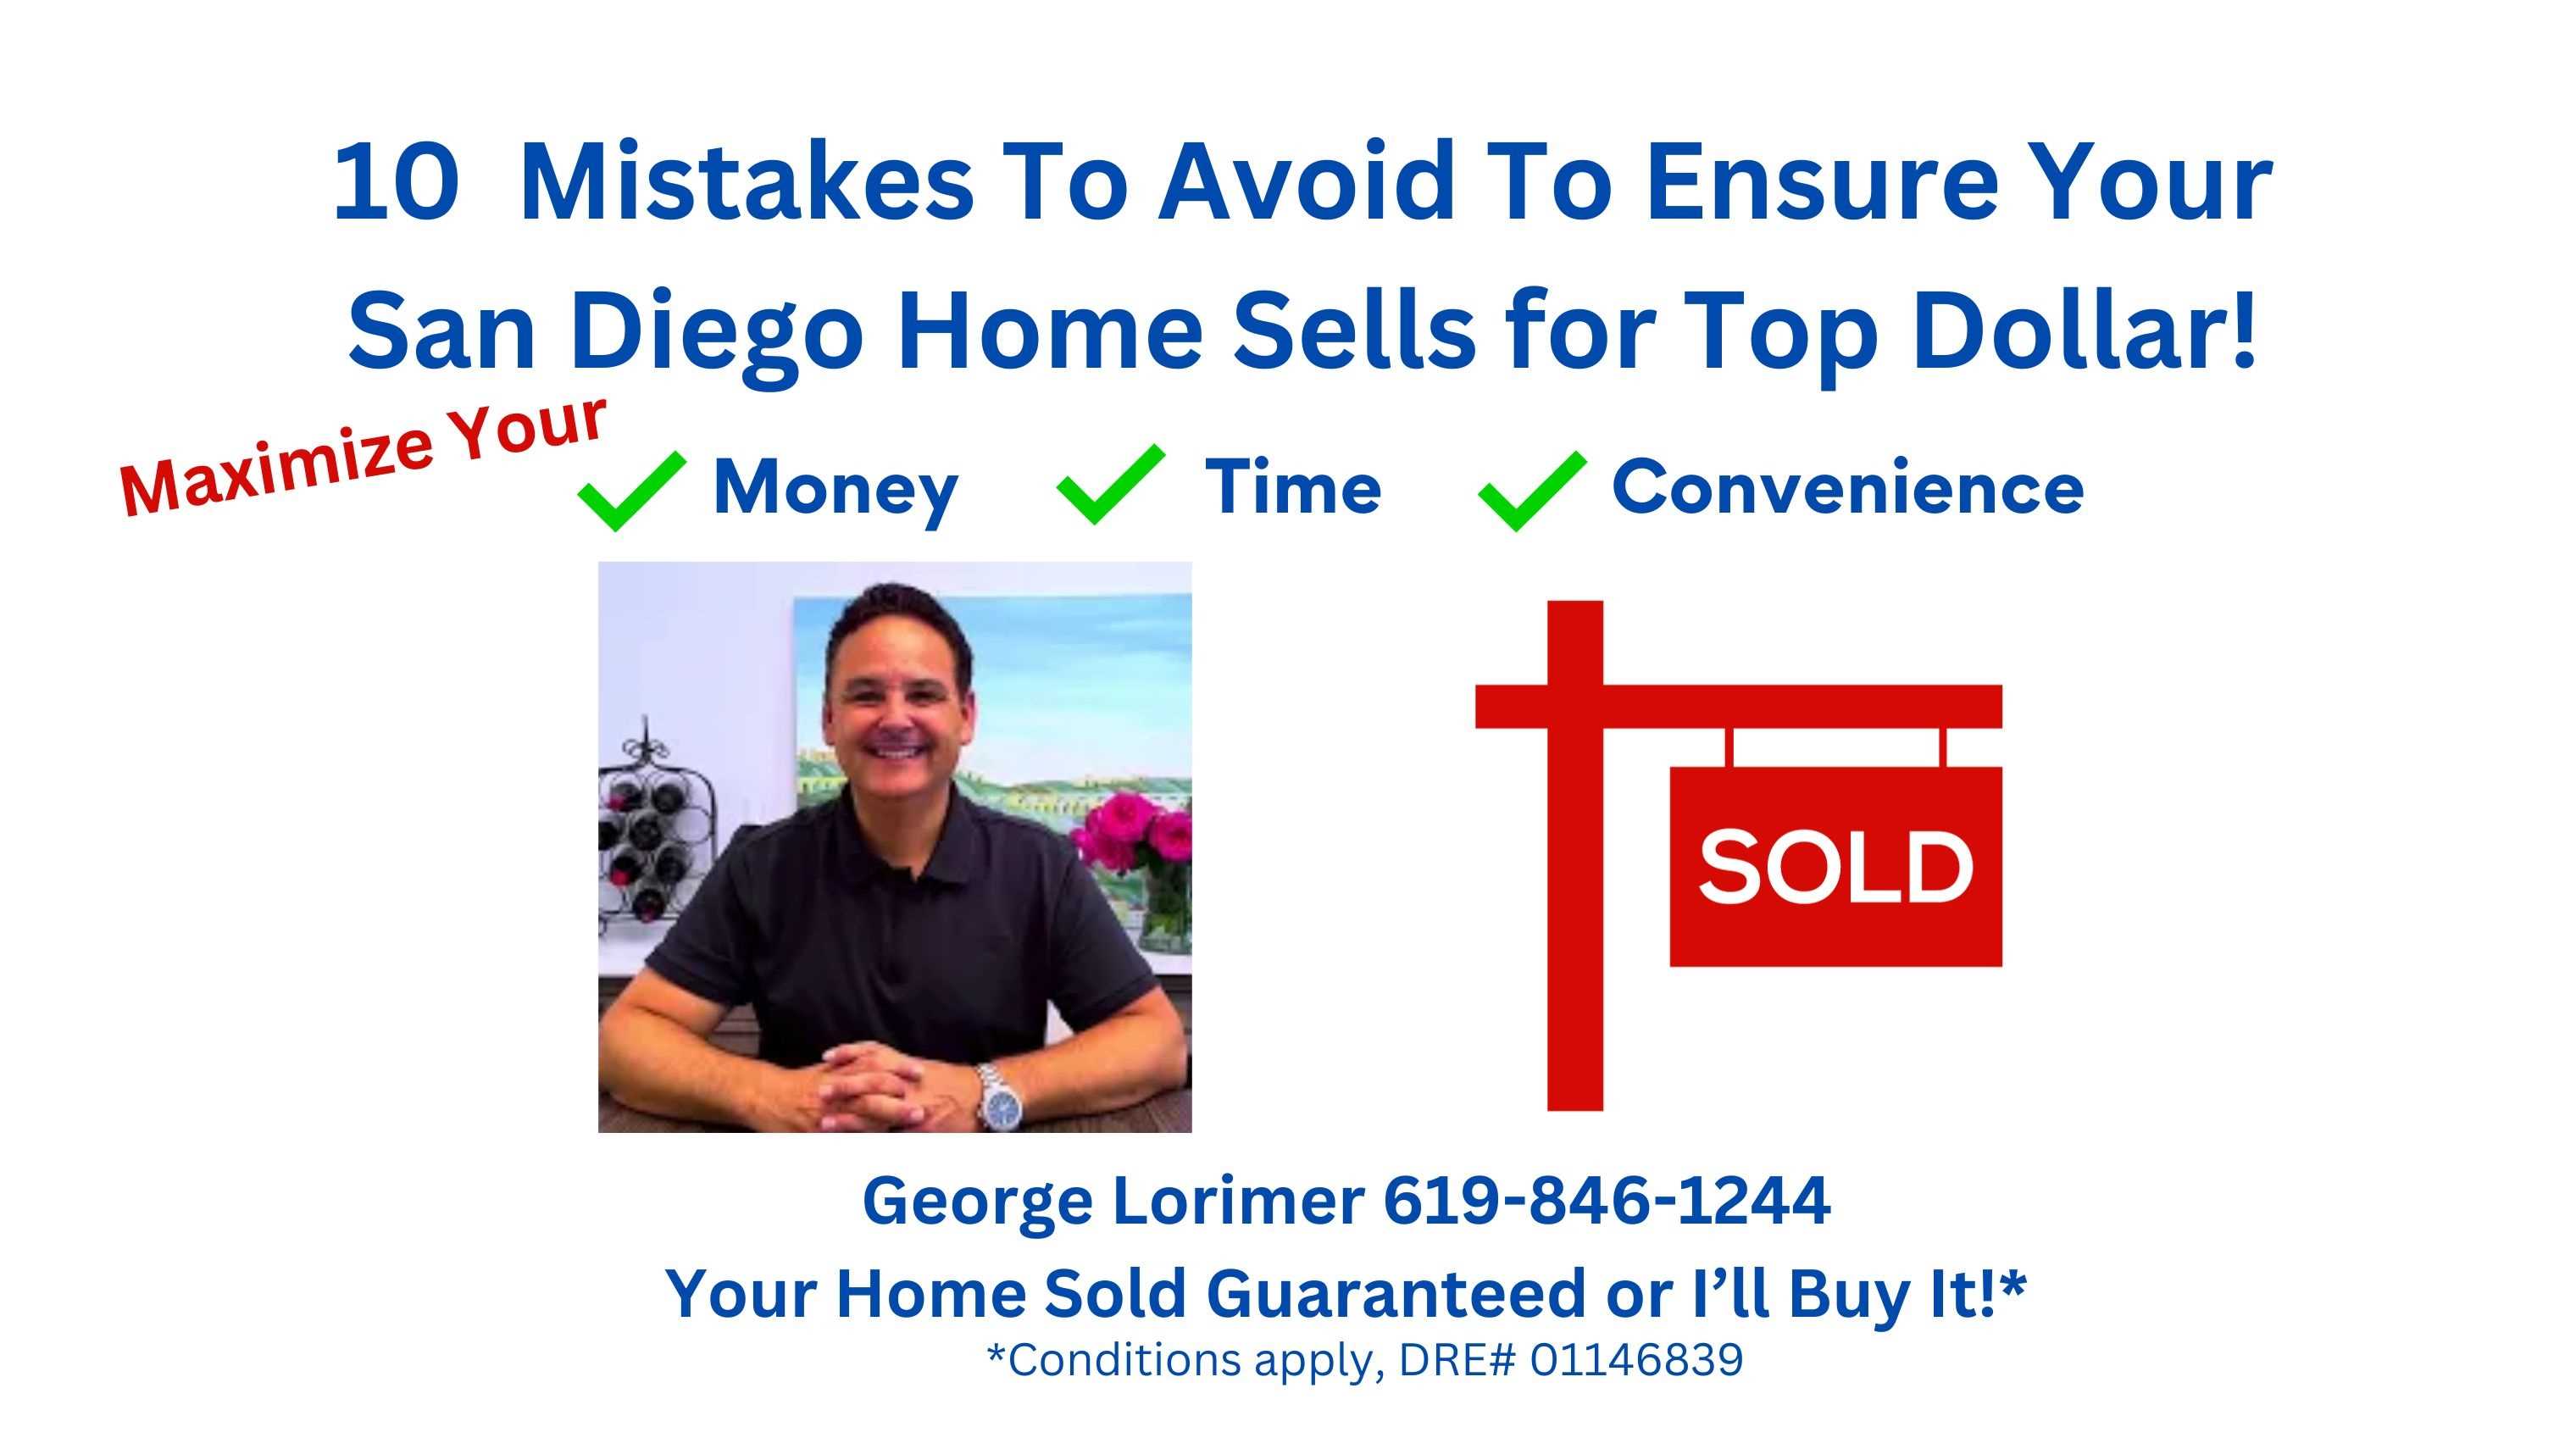 Avoid These To Sell Your San Diego Home for Top Dollar